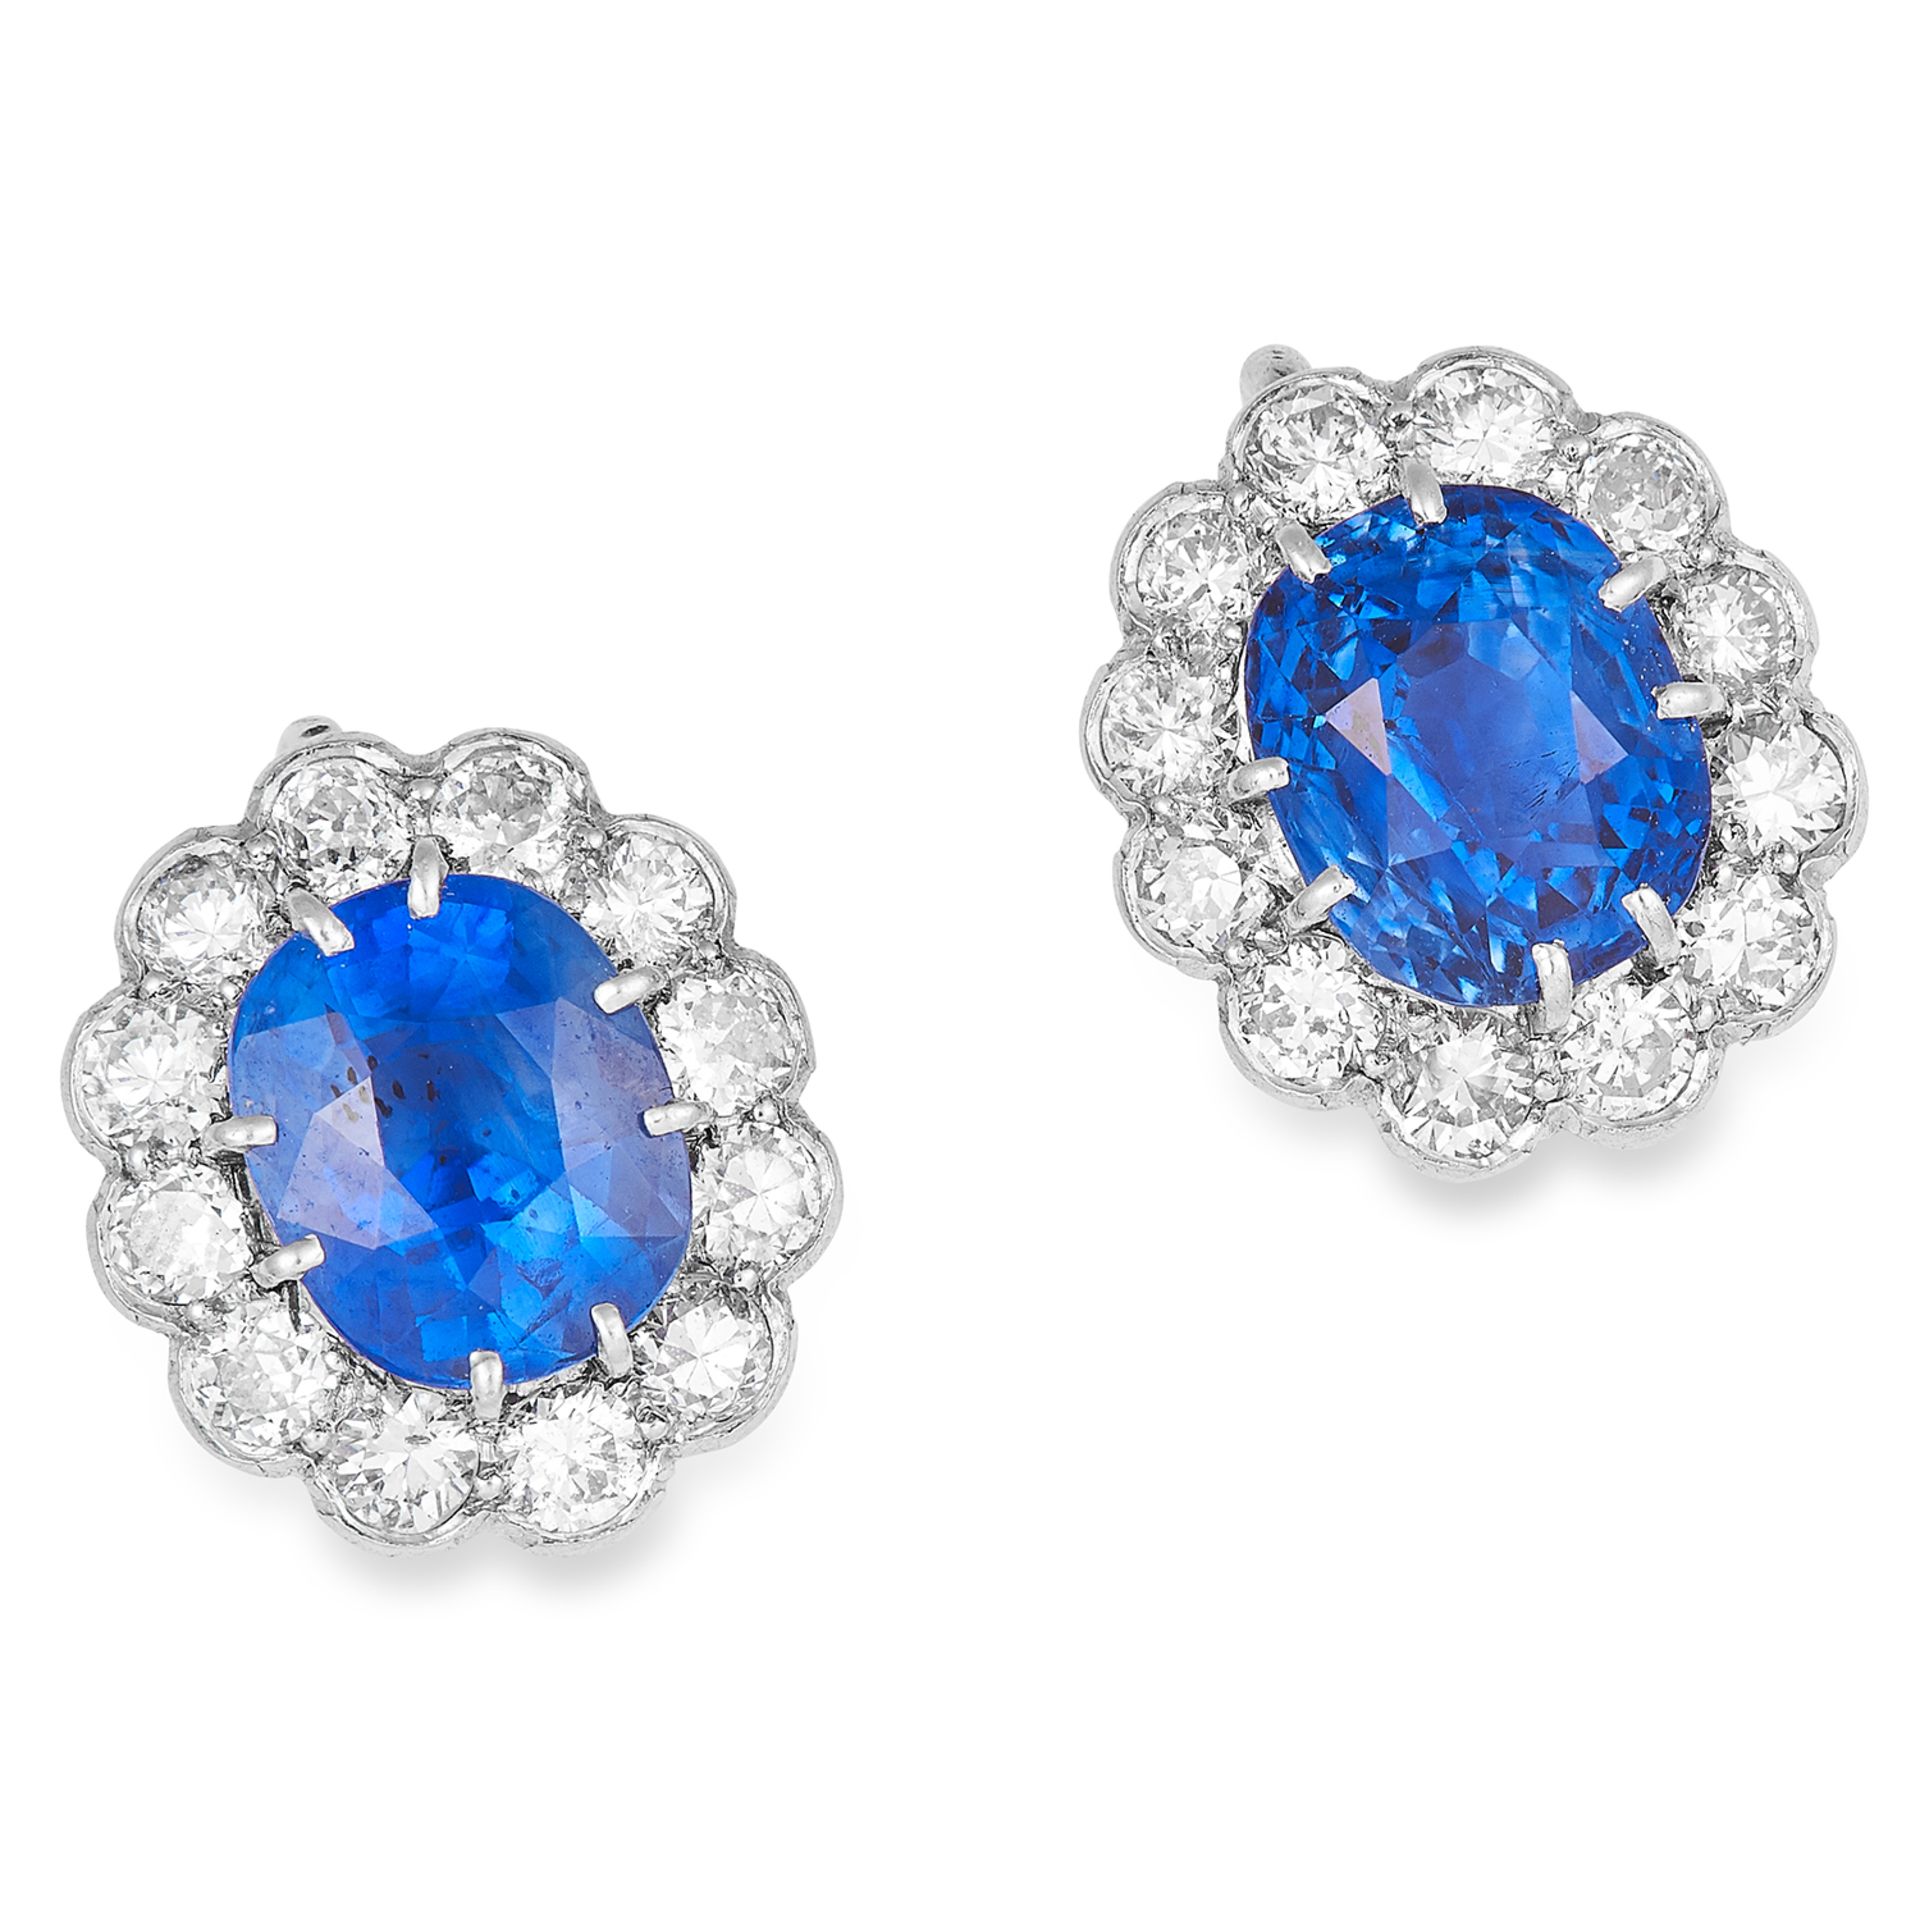 5.30 CARAT CEYLON NO HEAT SAPPHIRE AND DIAMOND EARRINGS in 18ct white gold or platinum, each set